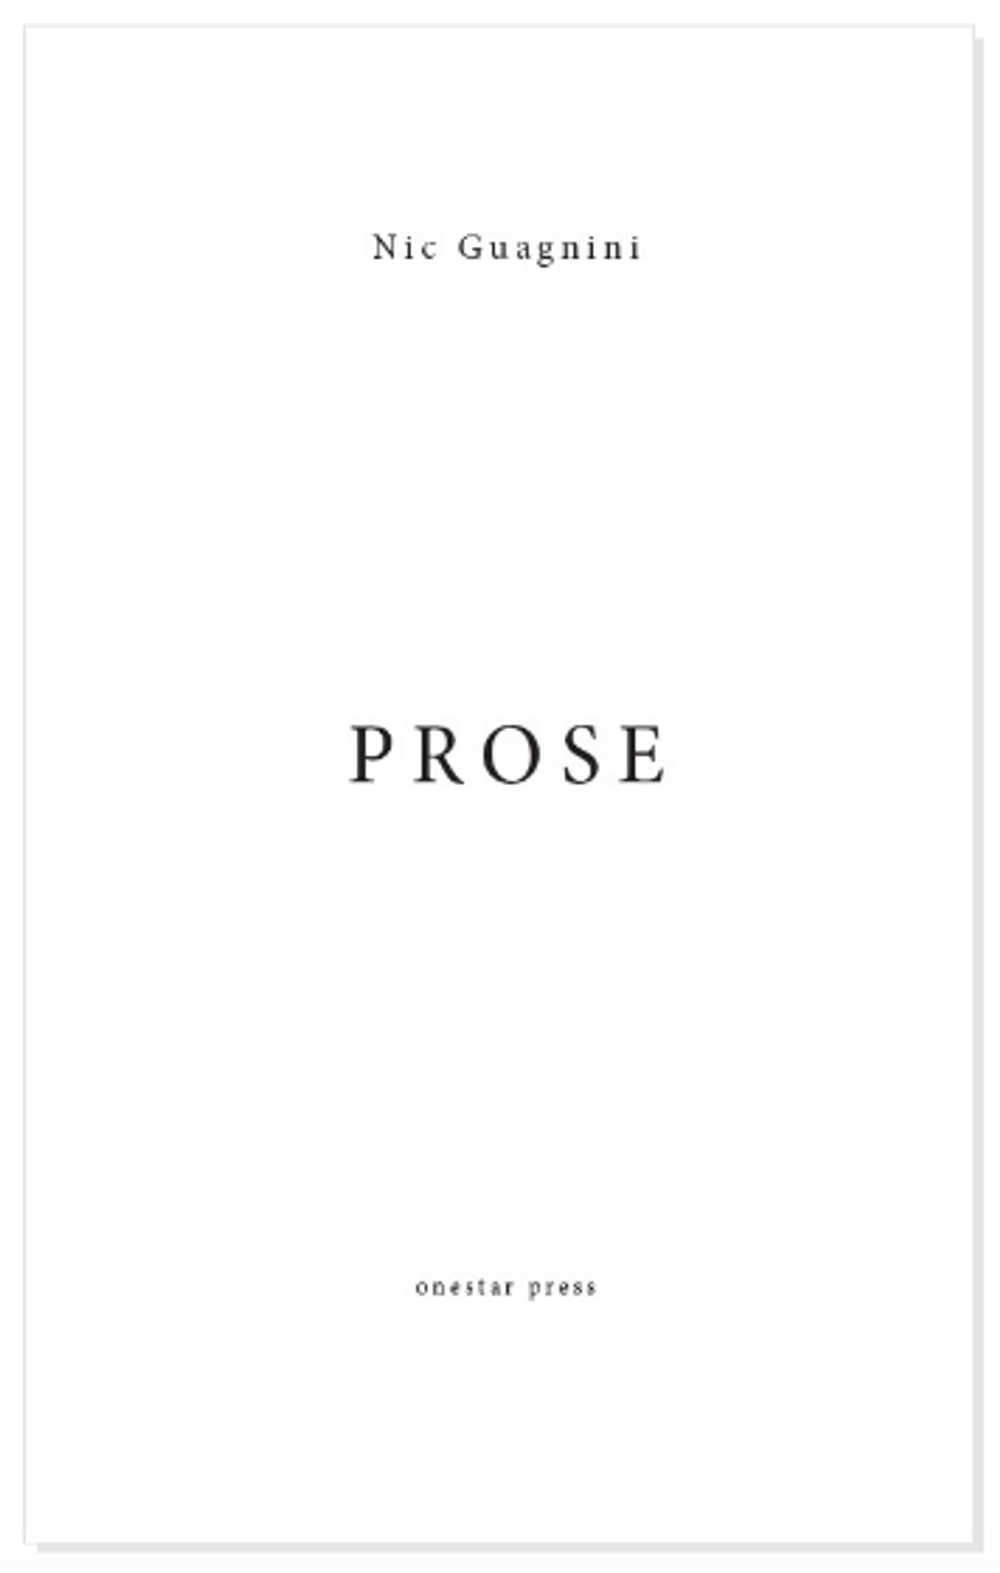 Book cover on plain gray background with title of Prose